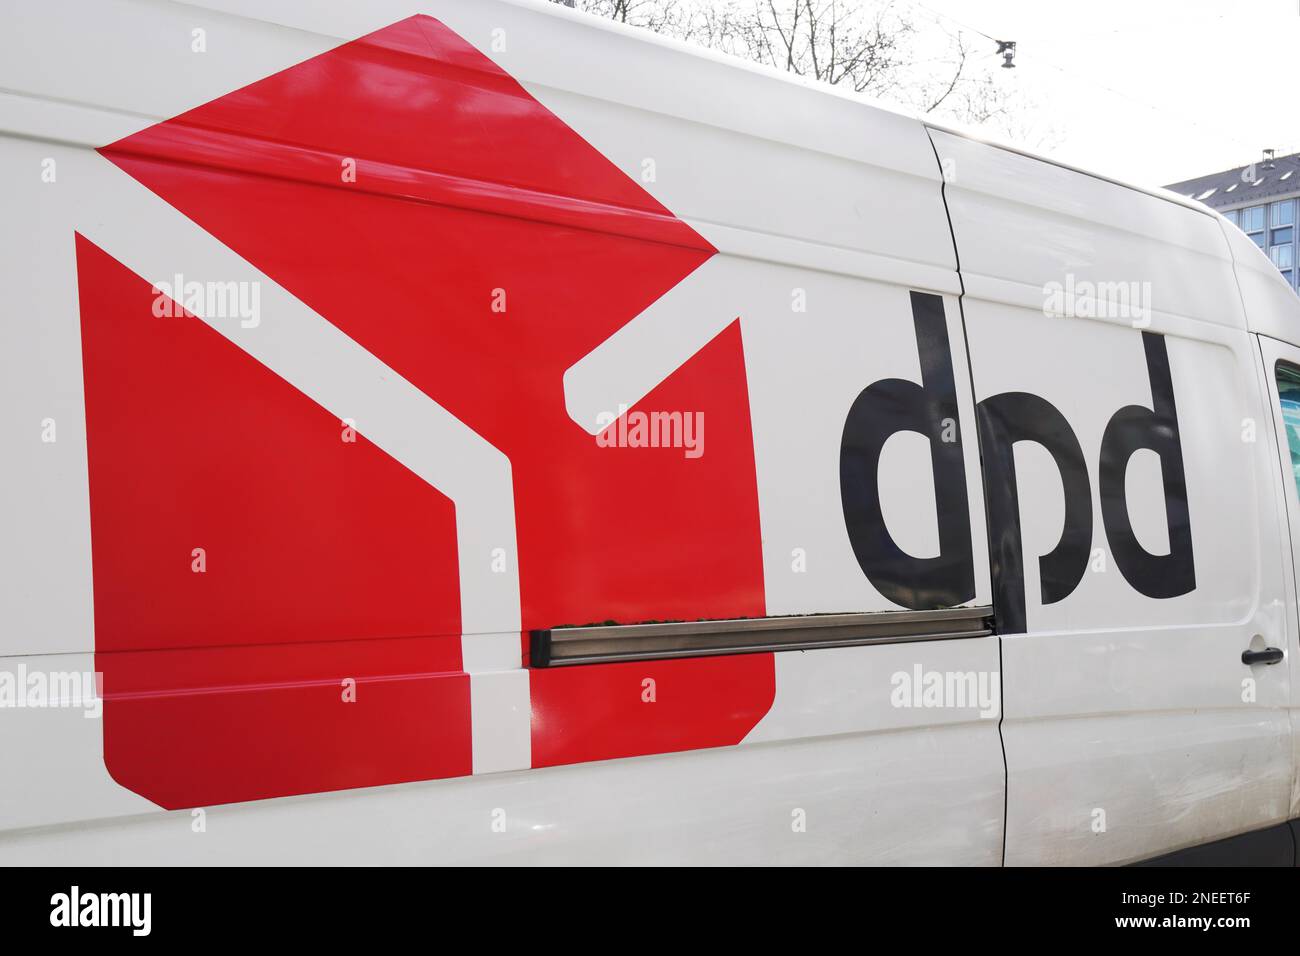 Hannover, Germany - March 2, 2020: dpd logo and brand on delivery van. DPD stands for Dynamic Parcel Distribution or Deutscher Paket Dienst in German Stock Photo